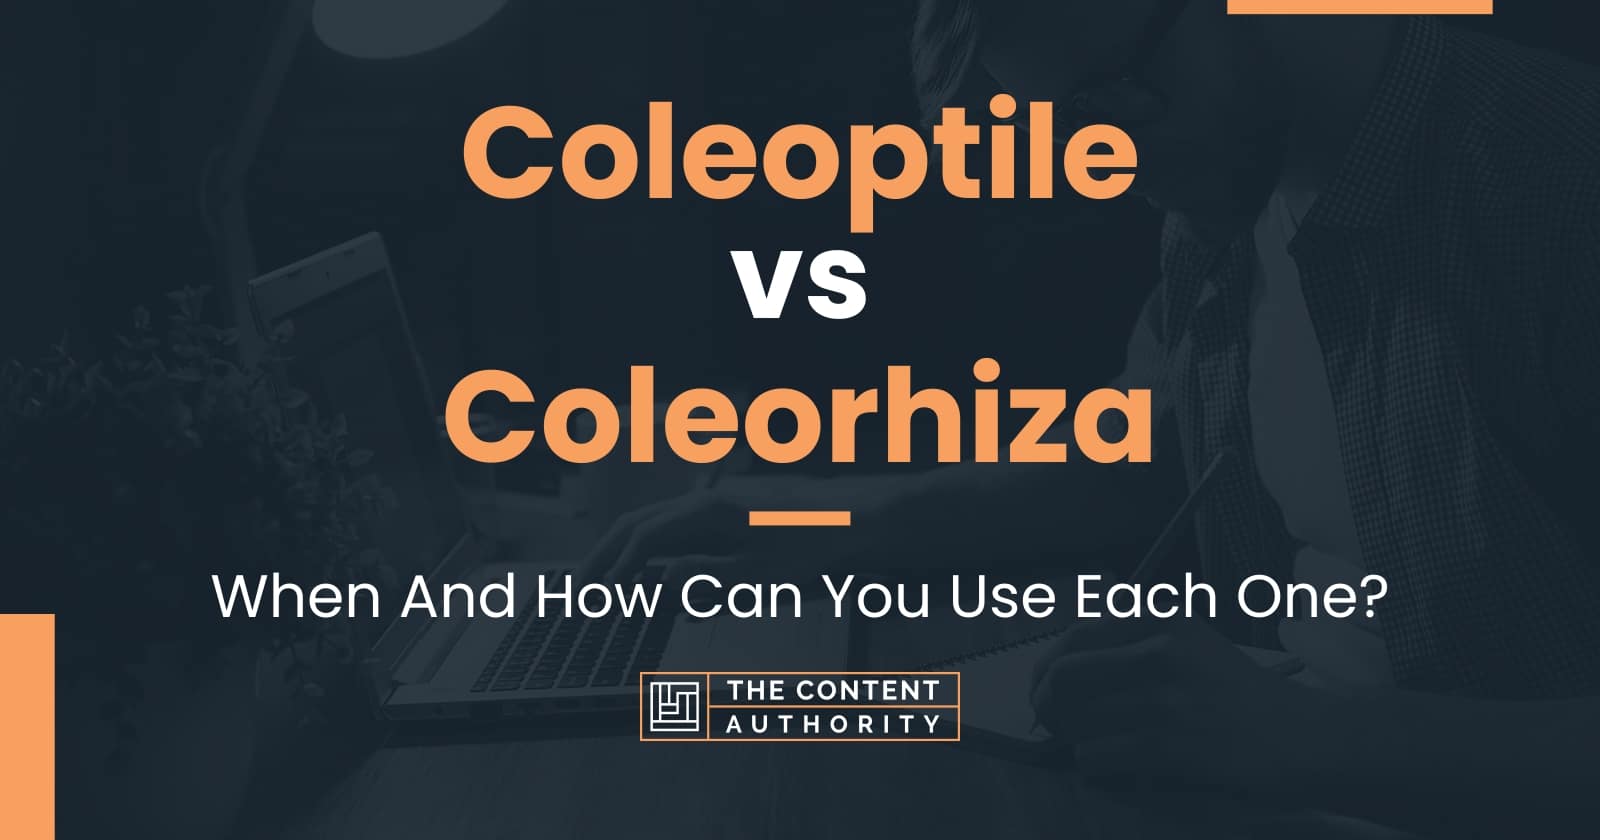 Coleoptile vs Coleorhiza: When And How Can You Use Each One?